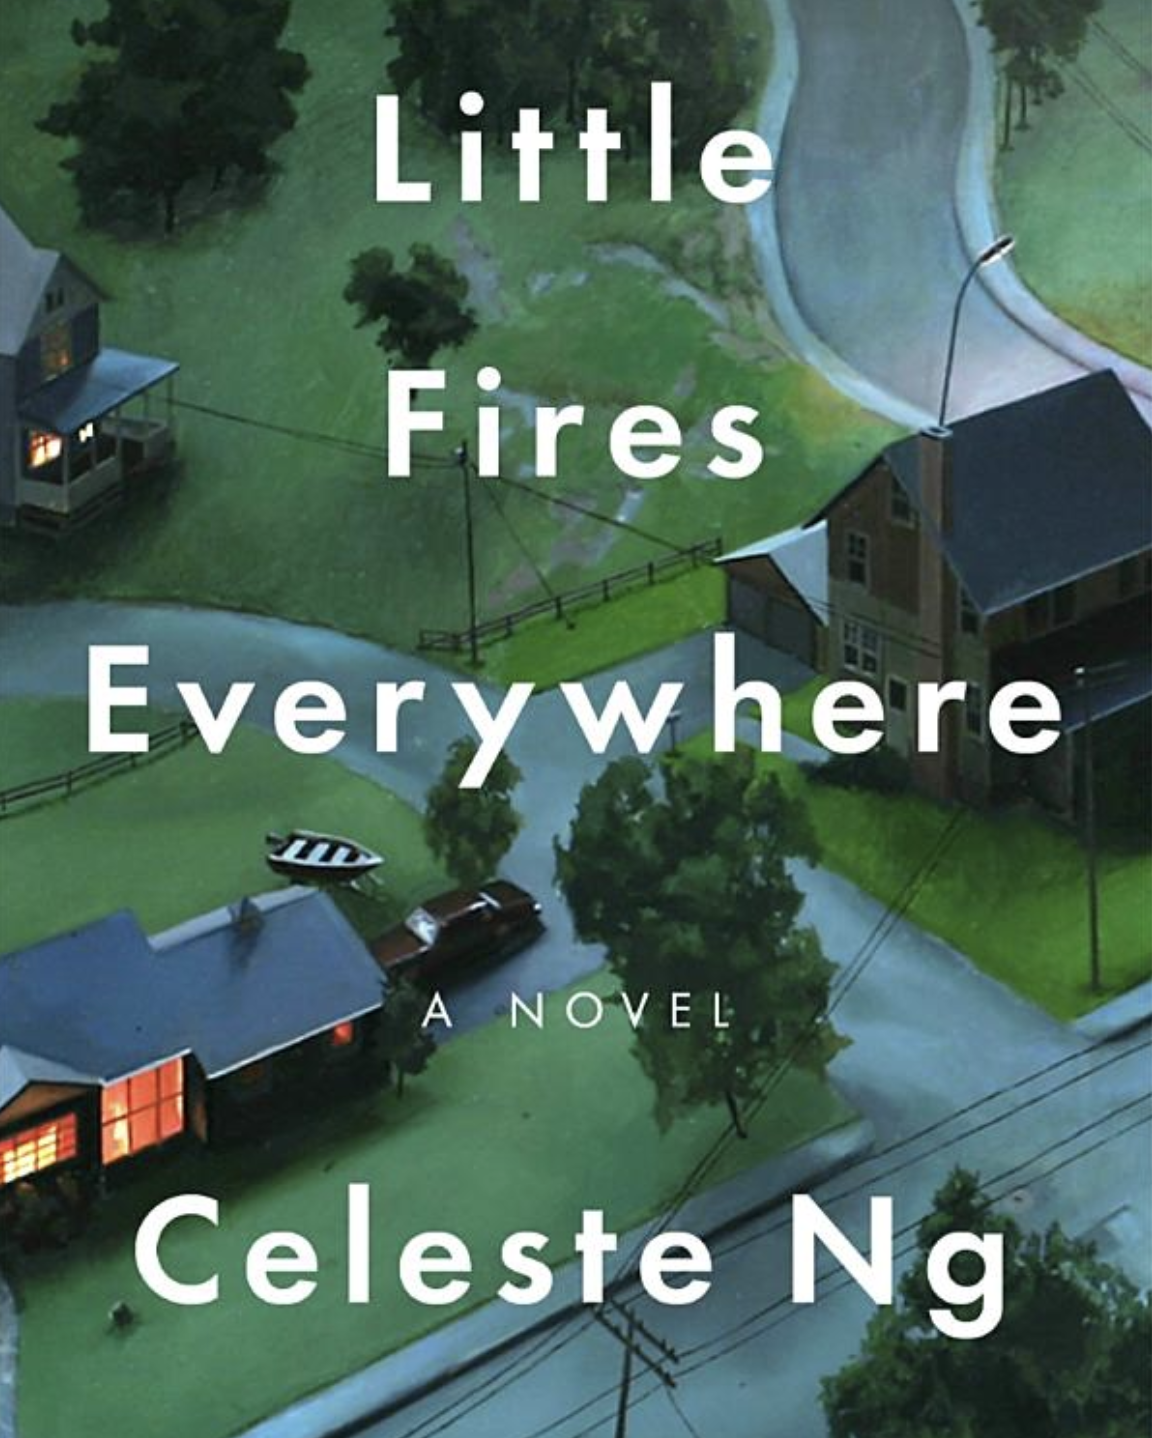 Little Fires Everywhere by Celeste Ng is an incendiary wonder.